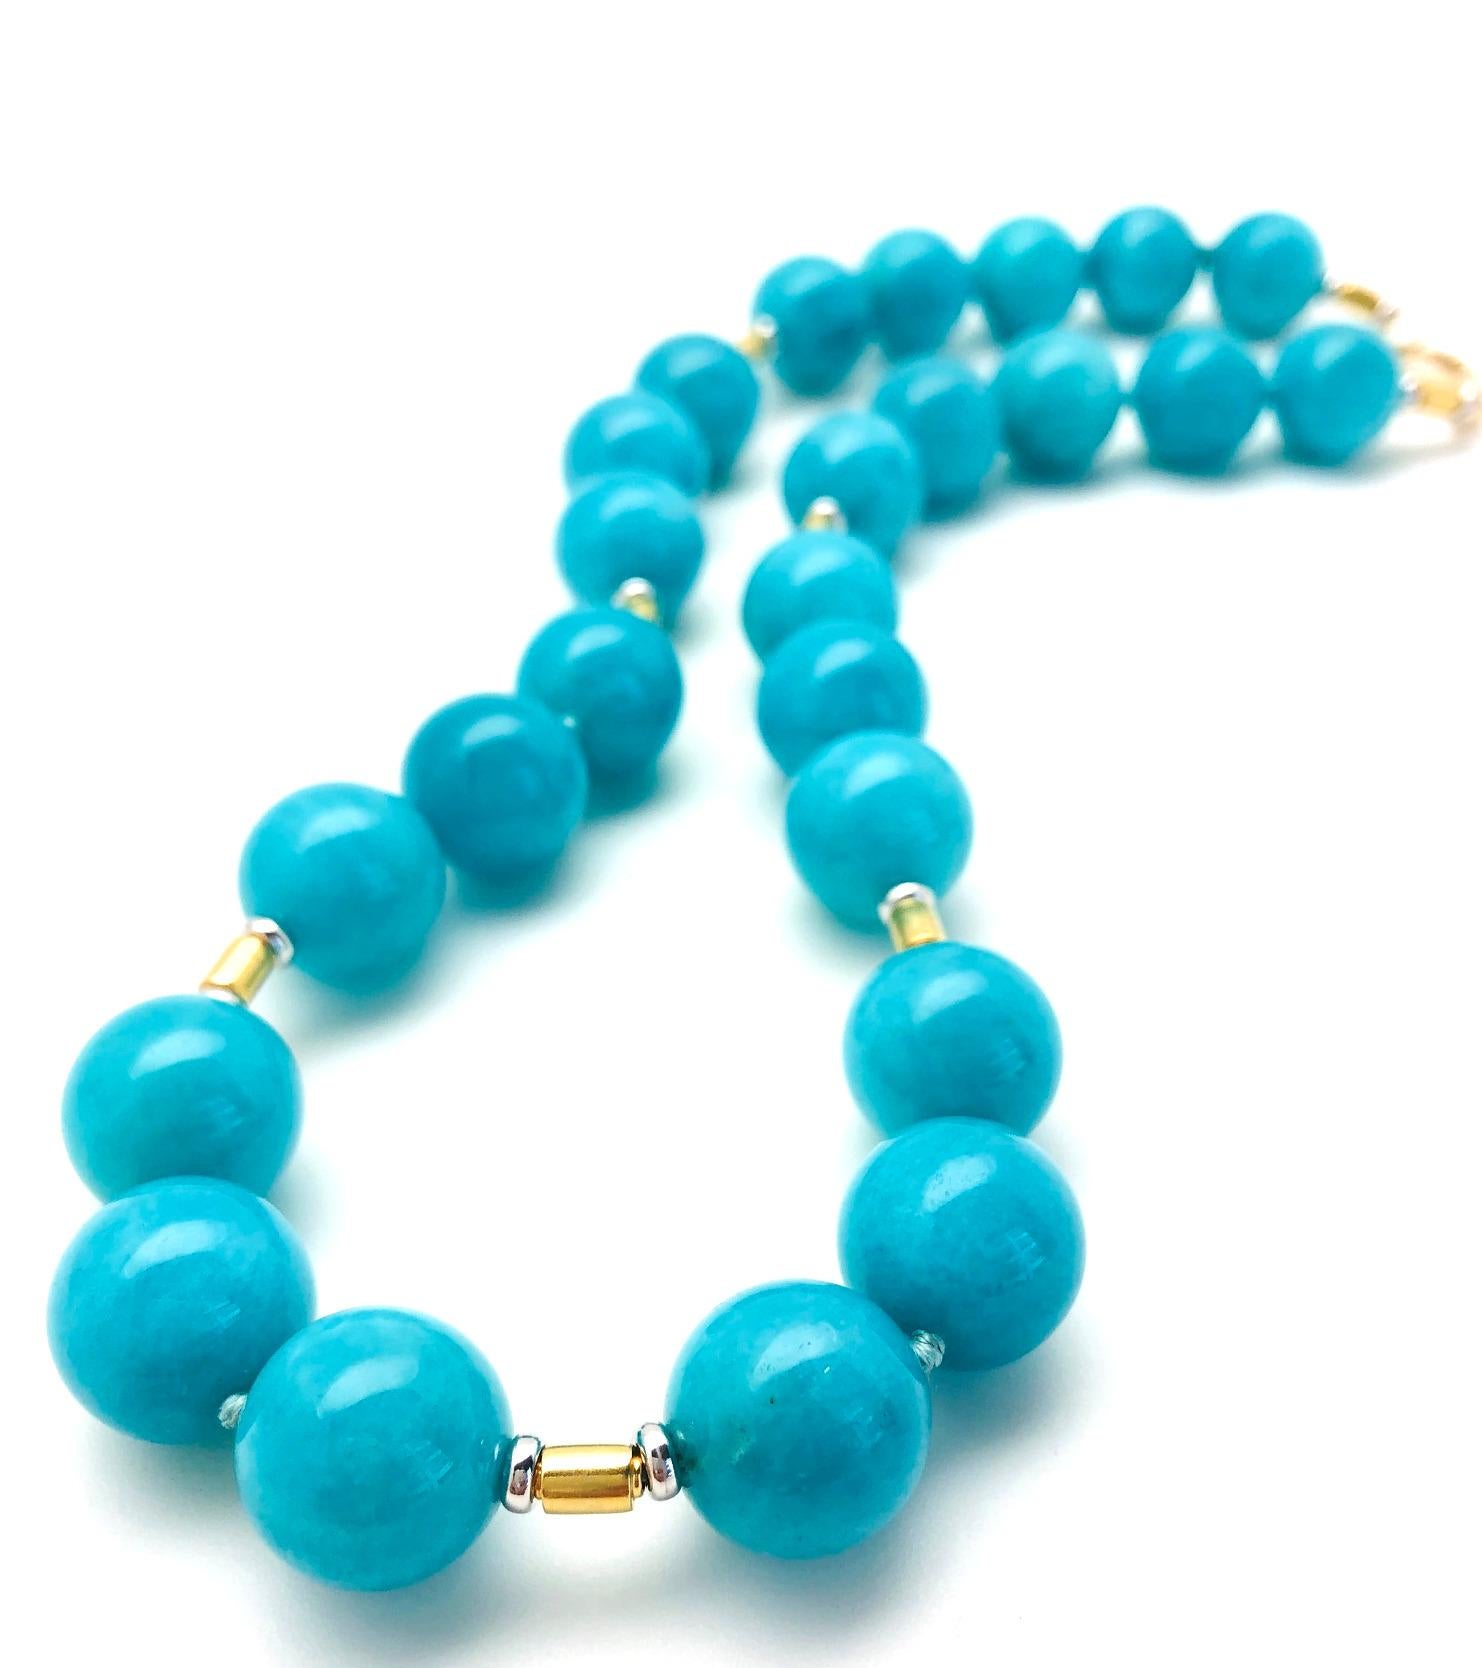 Big and bold and beautiful are words to describe this exceptional amazonite bead necklace. They are a bright, 